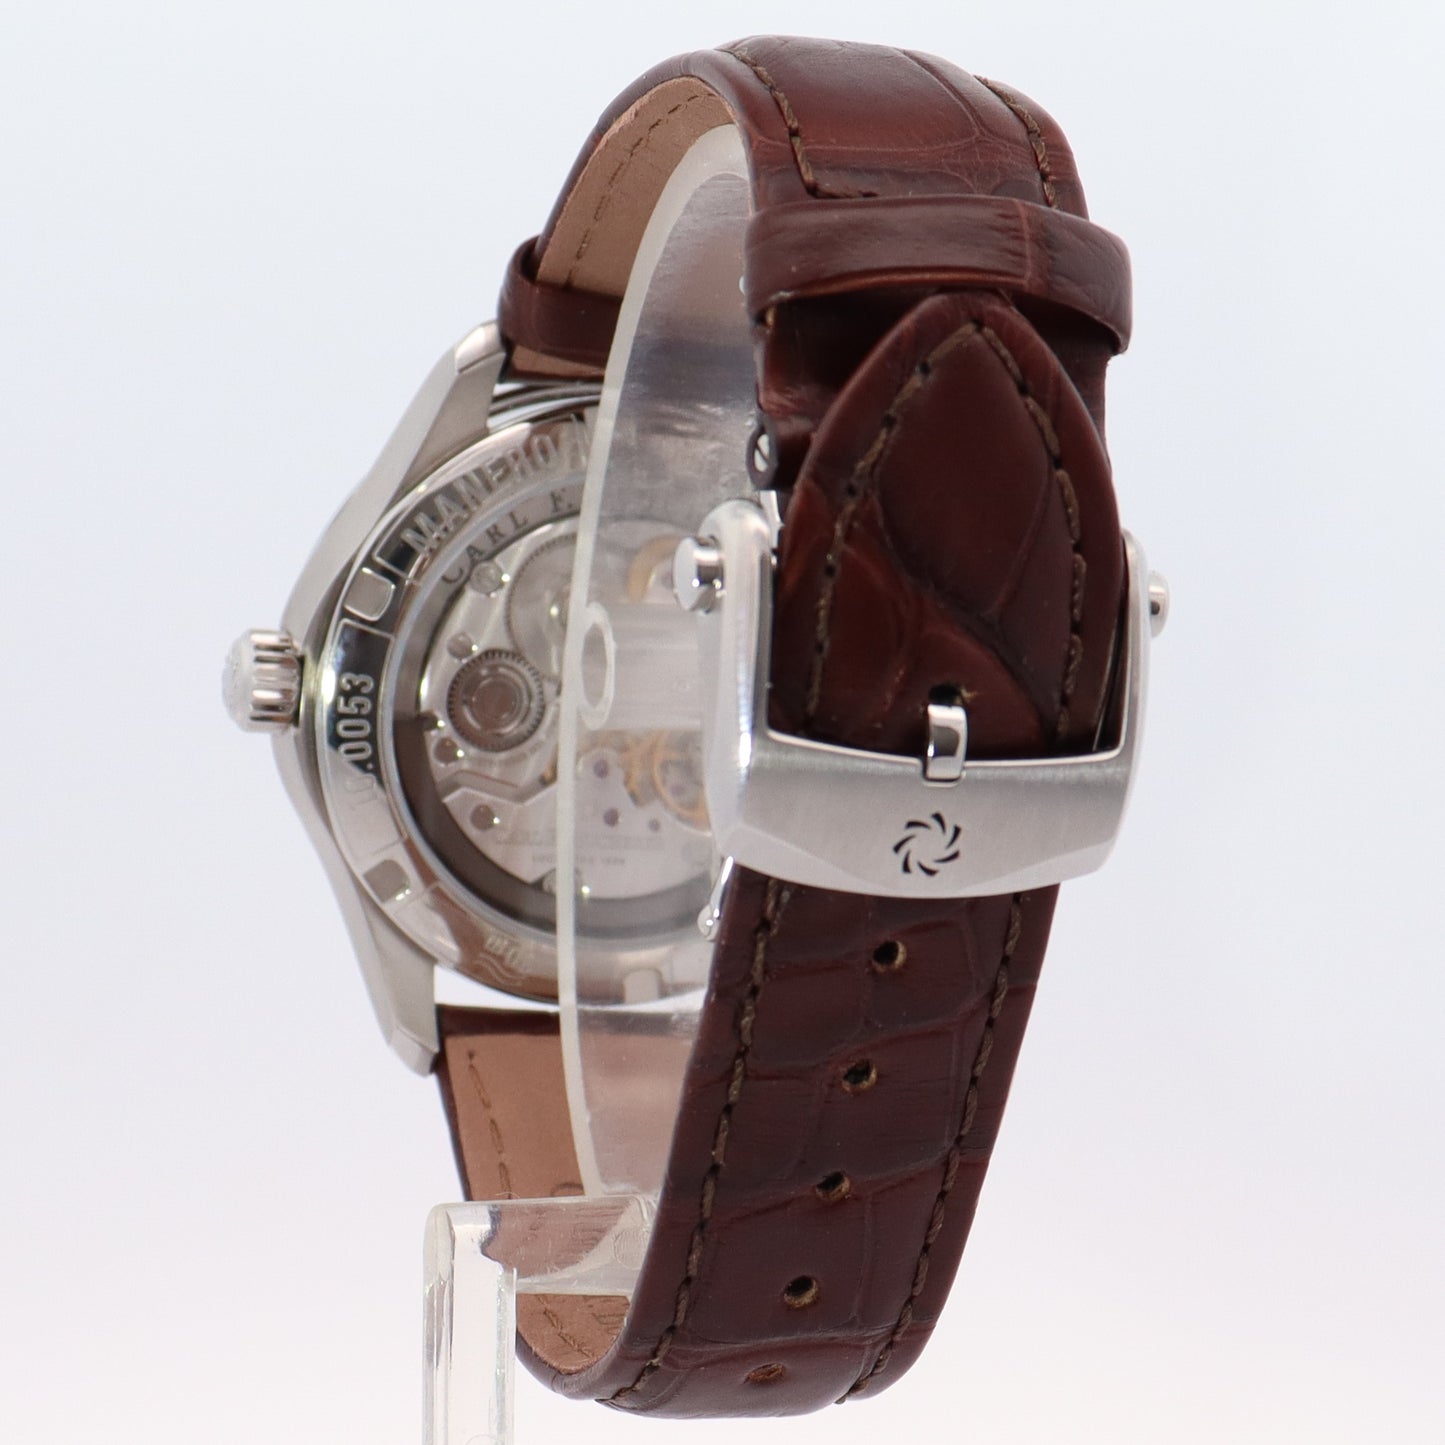 Load image into Gallery viewer, Carl F. Bucherer Manero Peripheral Stainless Steel 40.6mm Brown Stick Dial Watch Reference#: 00.10917.08.83.11 - Happy Jewelers Fine Jewelry Lifetime Warranty
